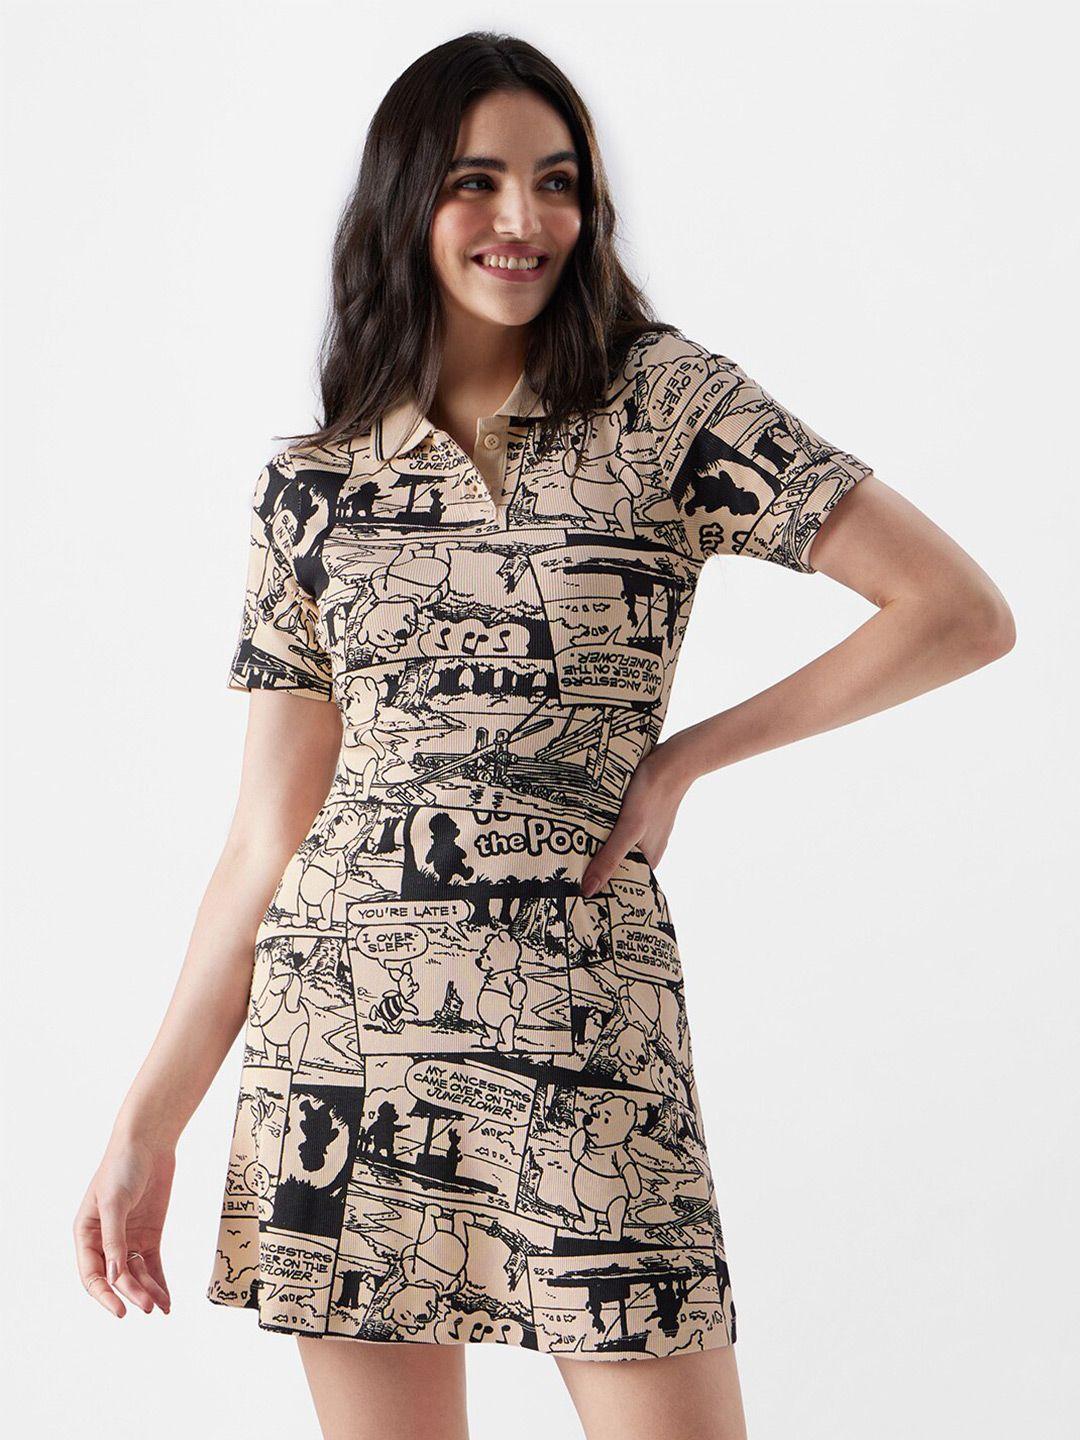 the-souled-store-abstract-print-shirt-styled-cotton-dress